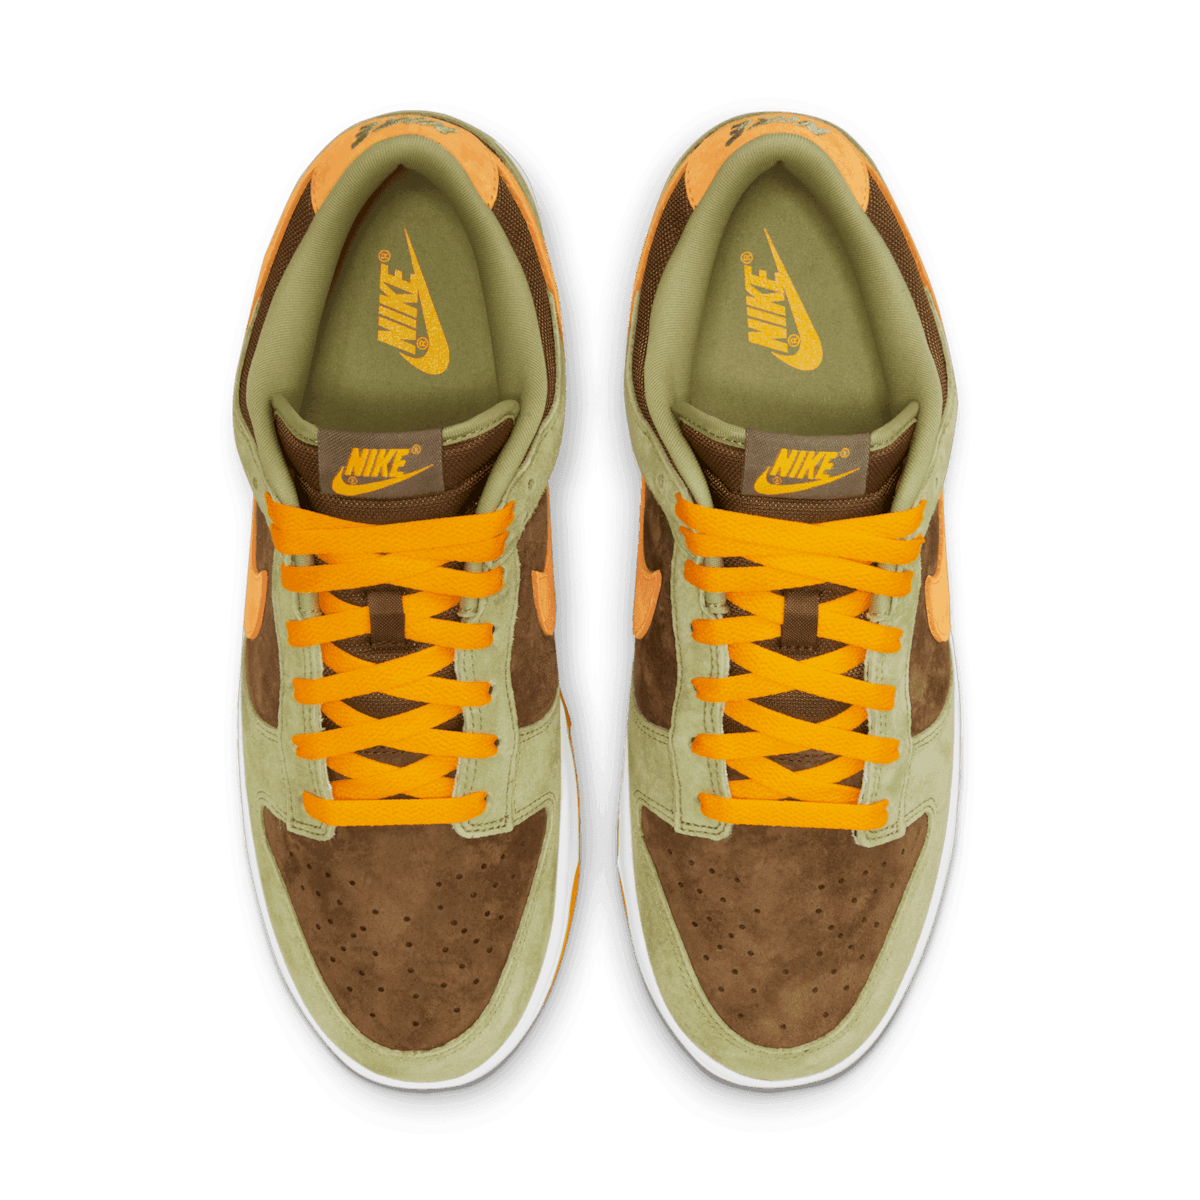 Nike and - Dusty Raffles Olive Low DH5360-300 Release Date Dunk